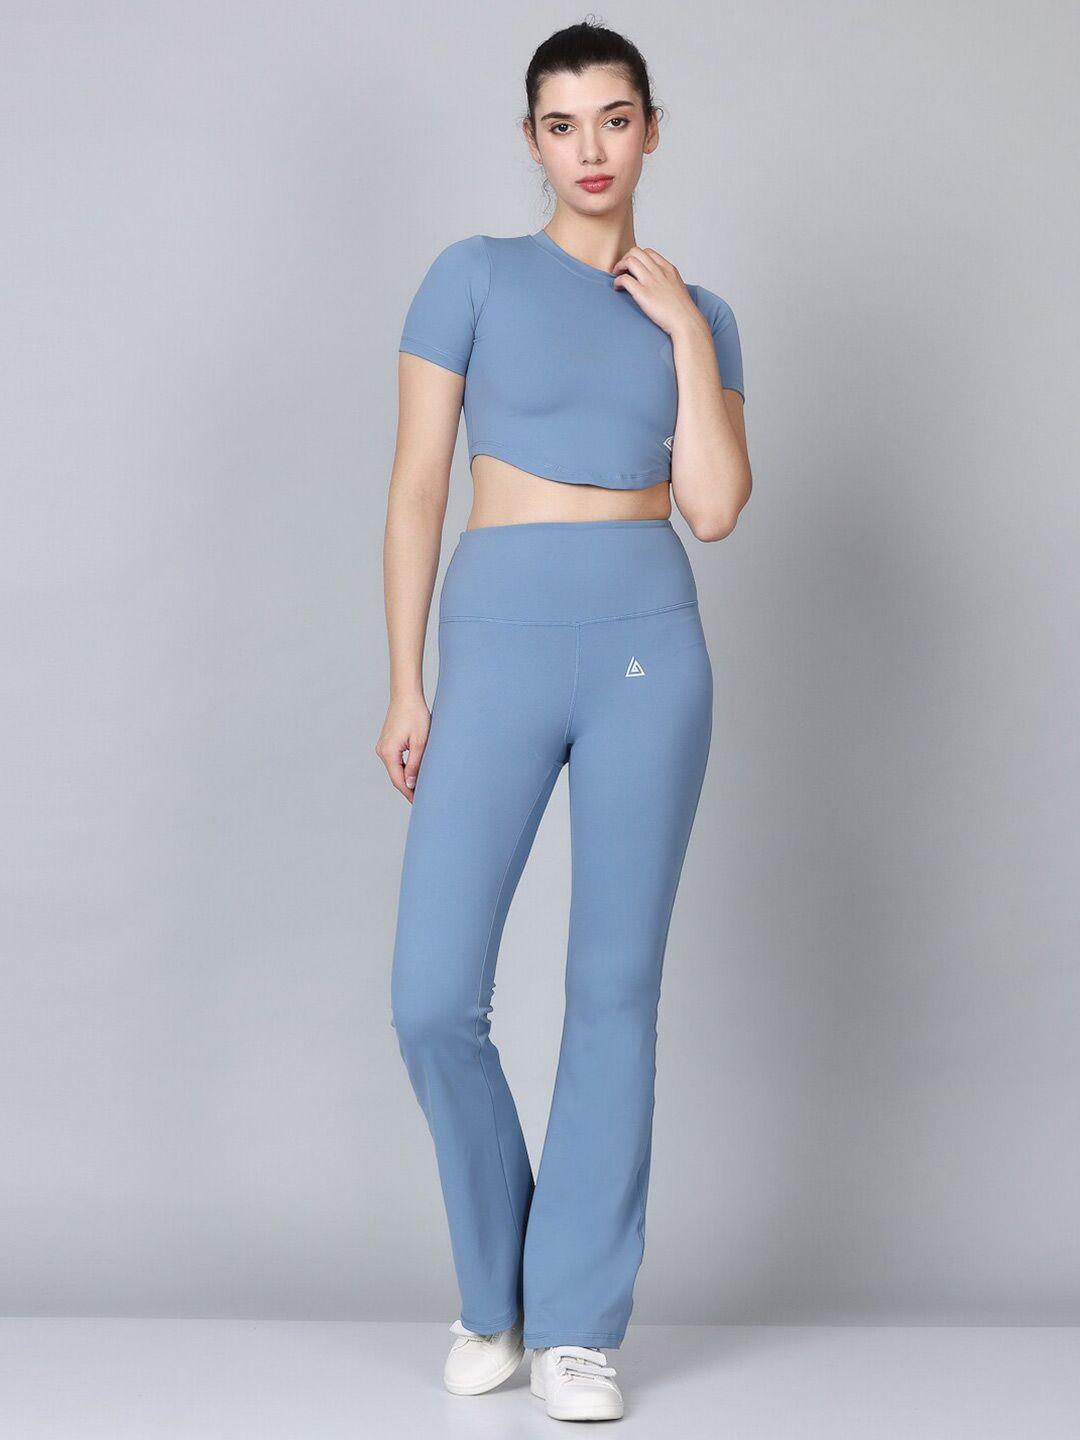 aesthetic bodies short sleeves crop top with flared trouser